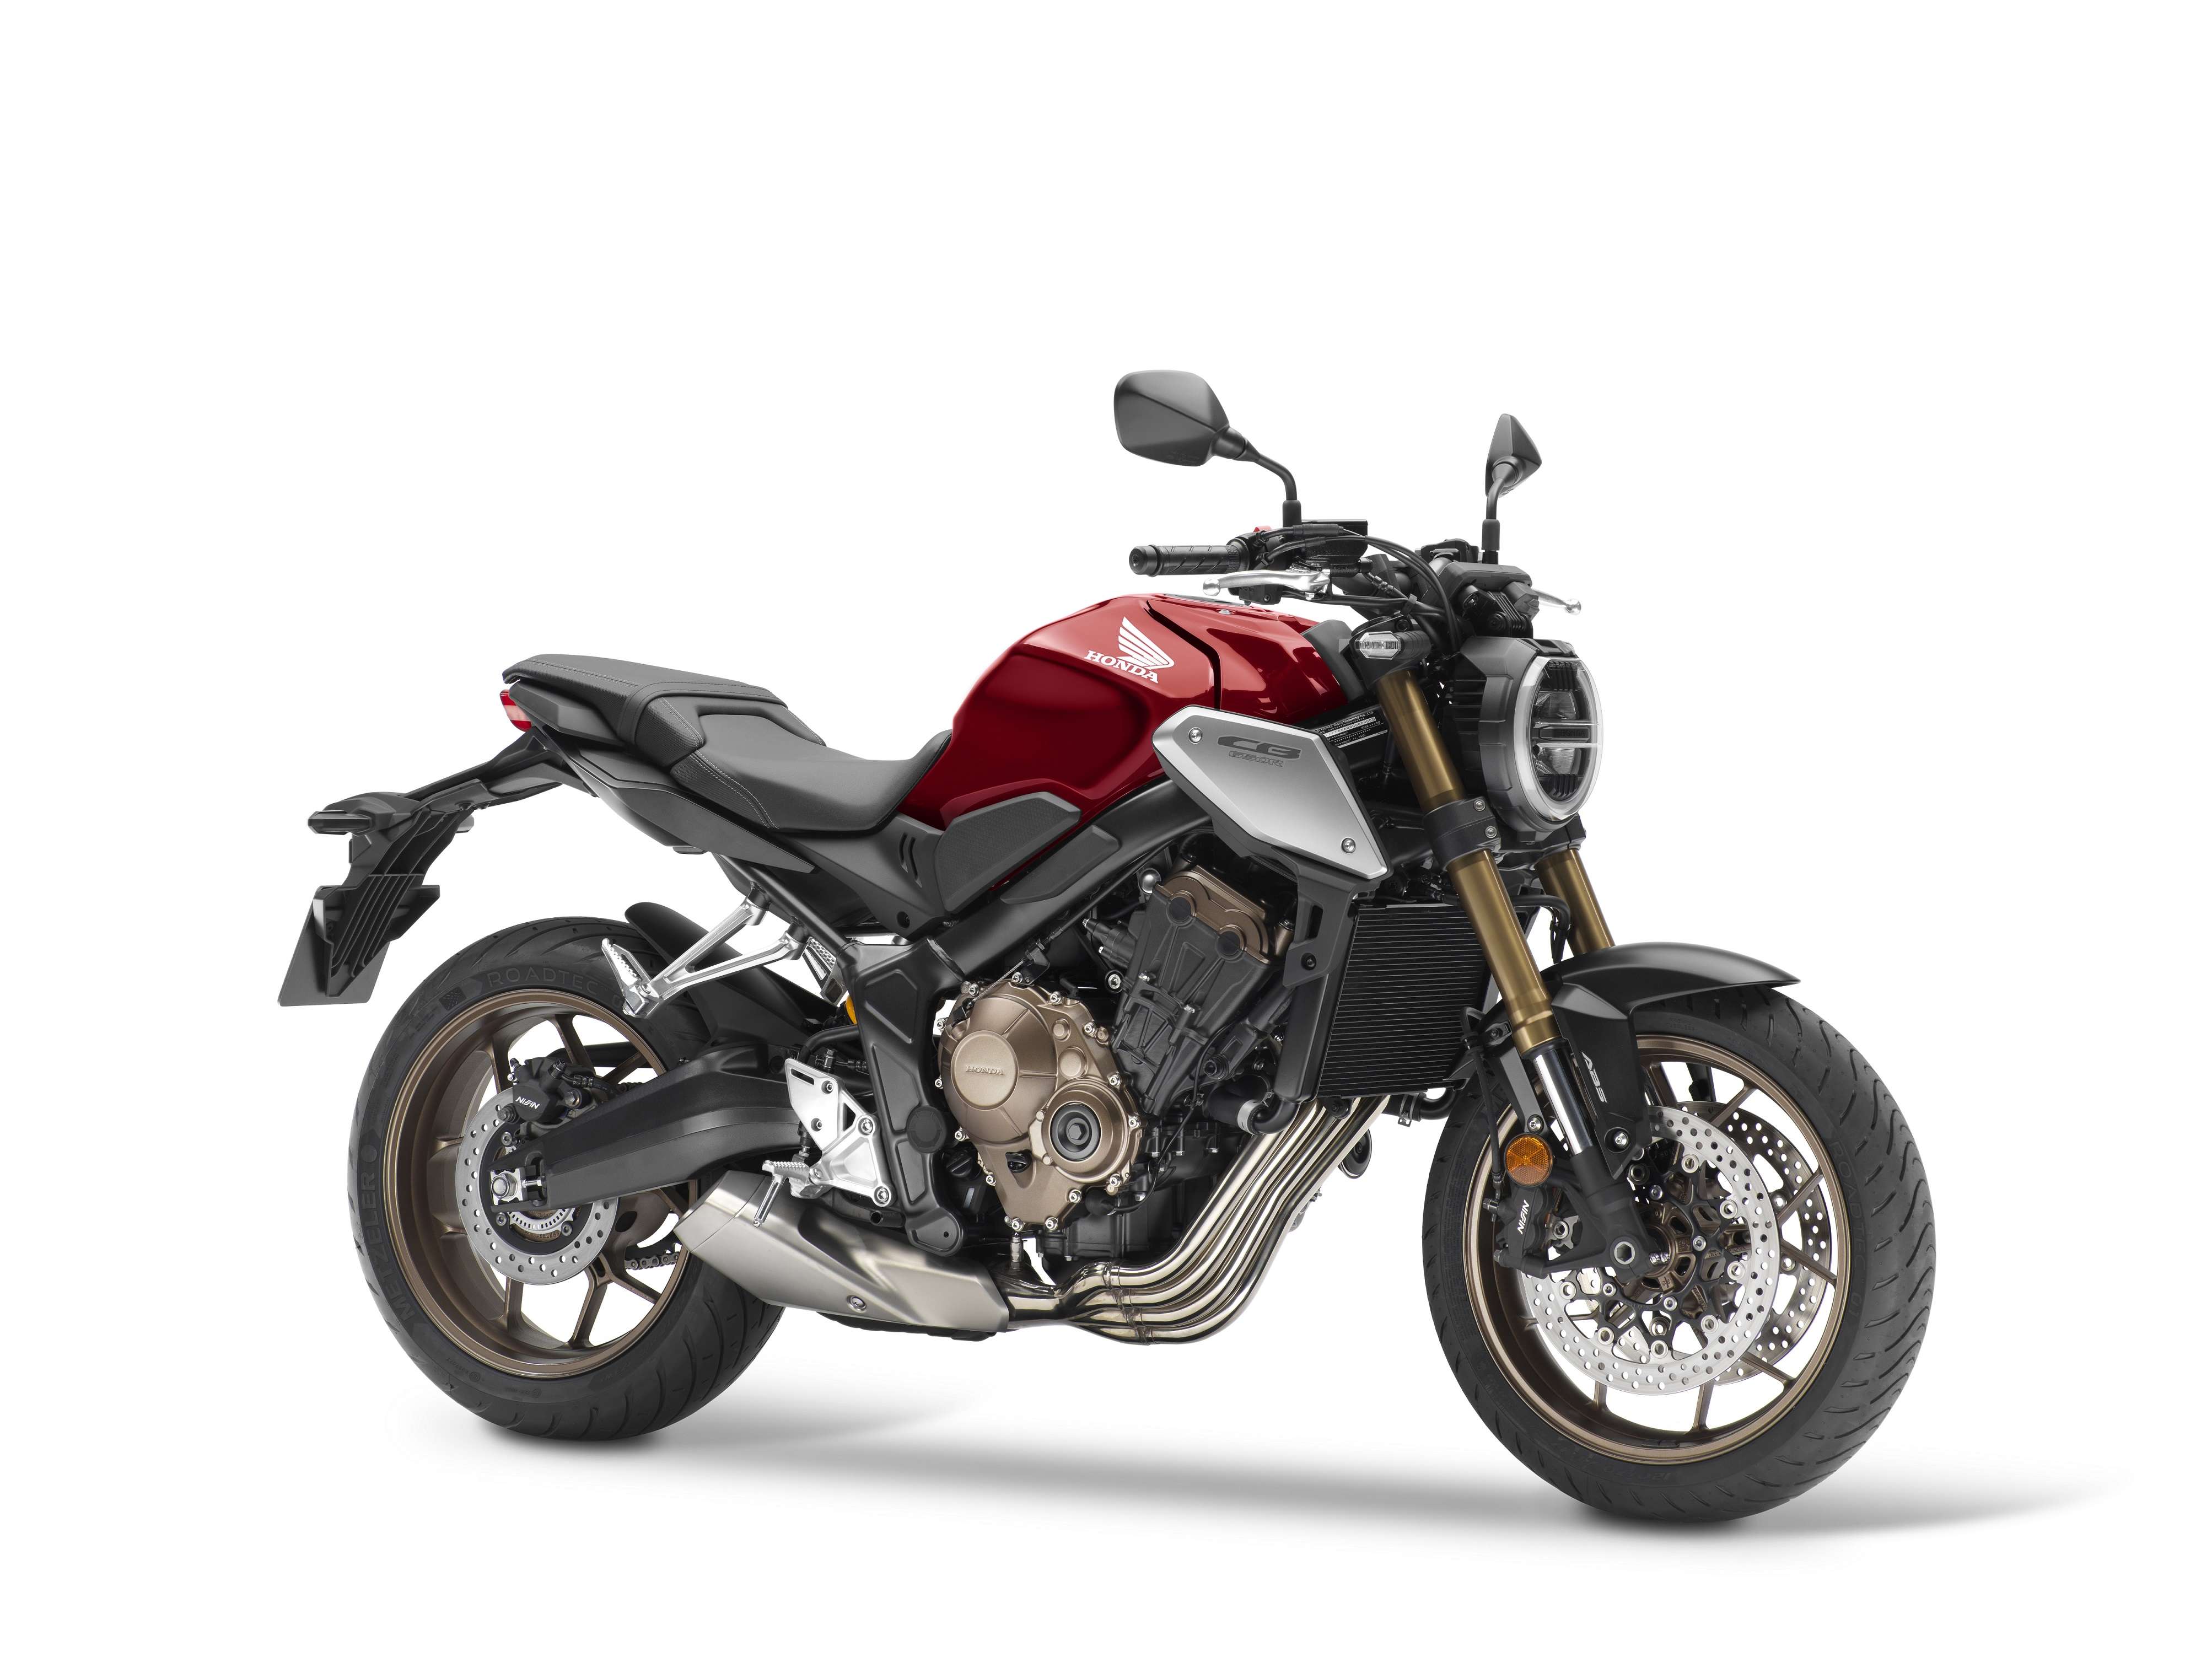 HMSI launches new 650 siblings for INR 8.88 lakh and INR 8.67 lakh